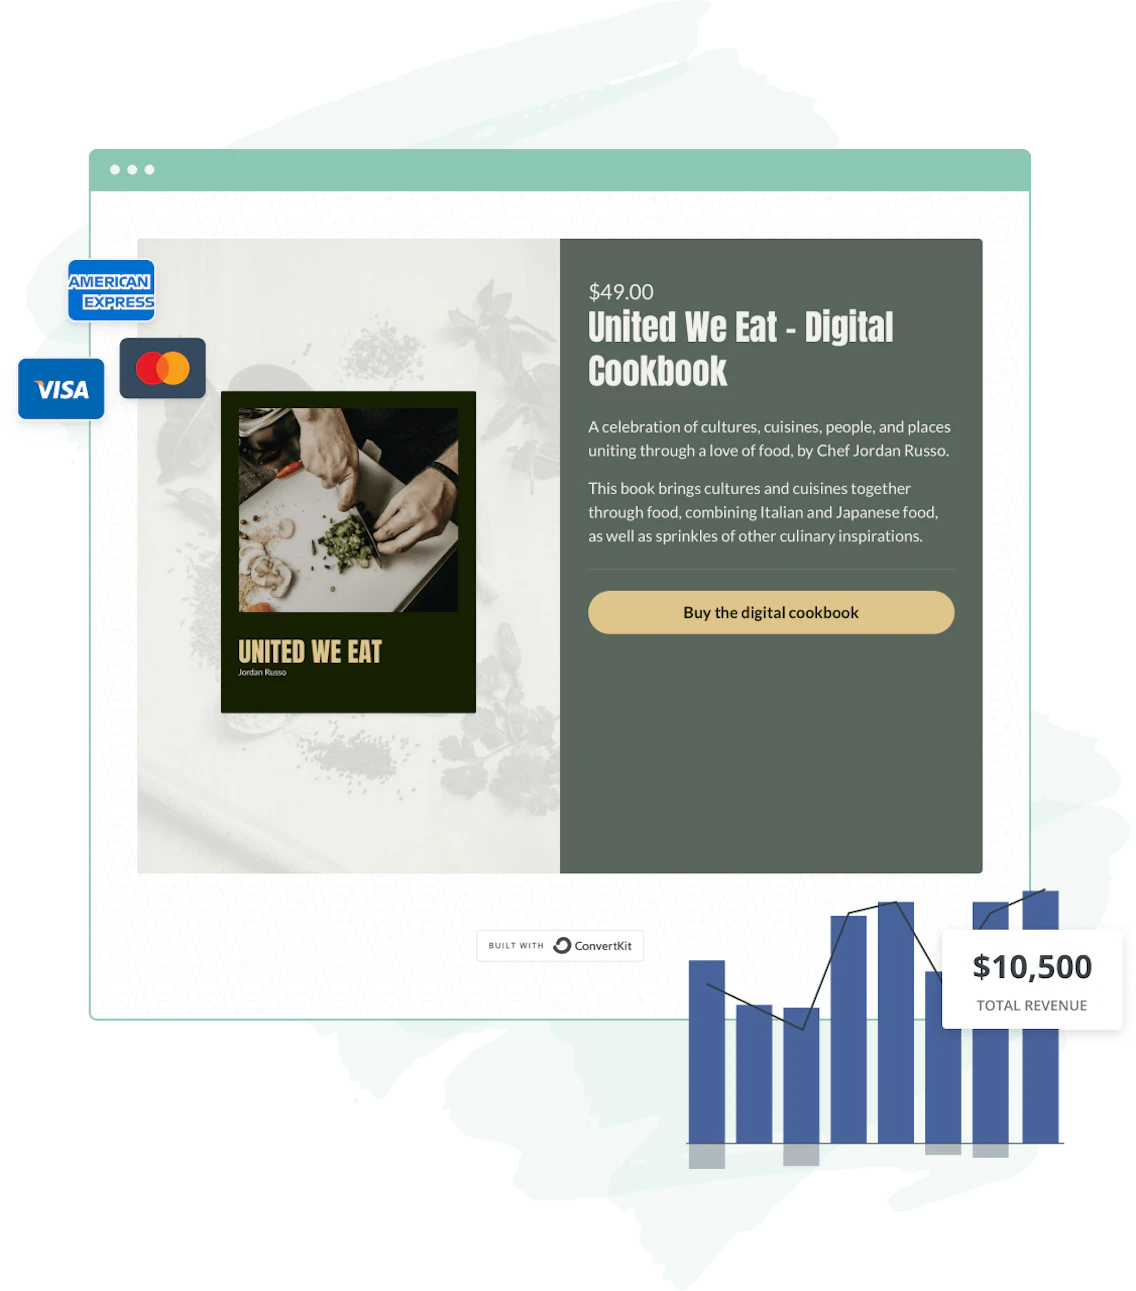 Sell your digital products